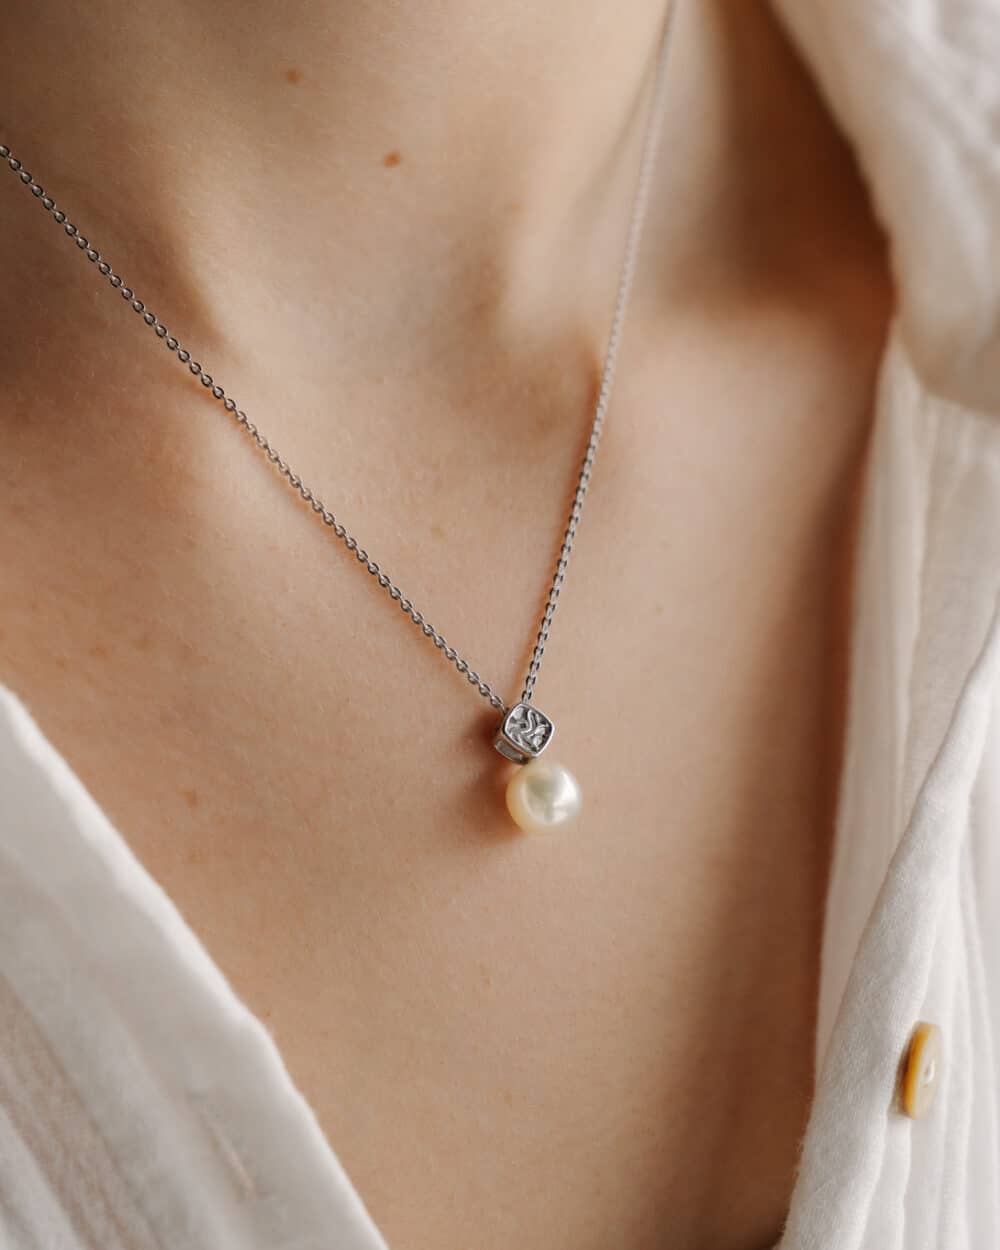 Seagrass Pendant worn by Model